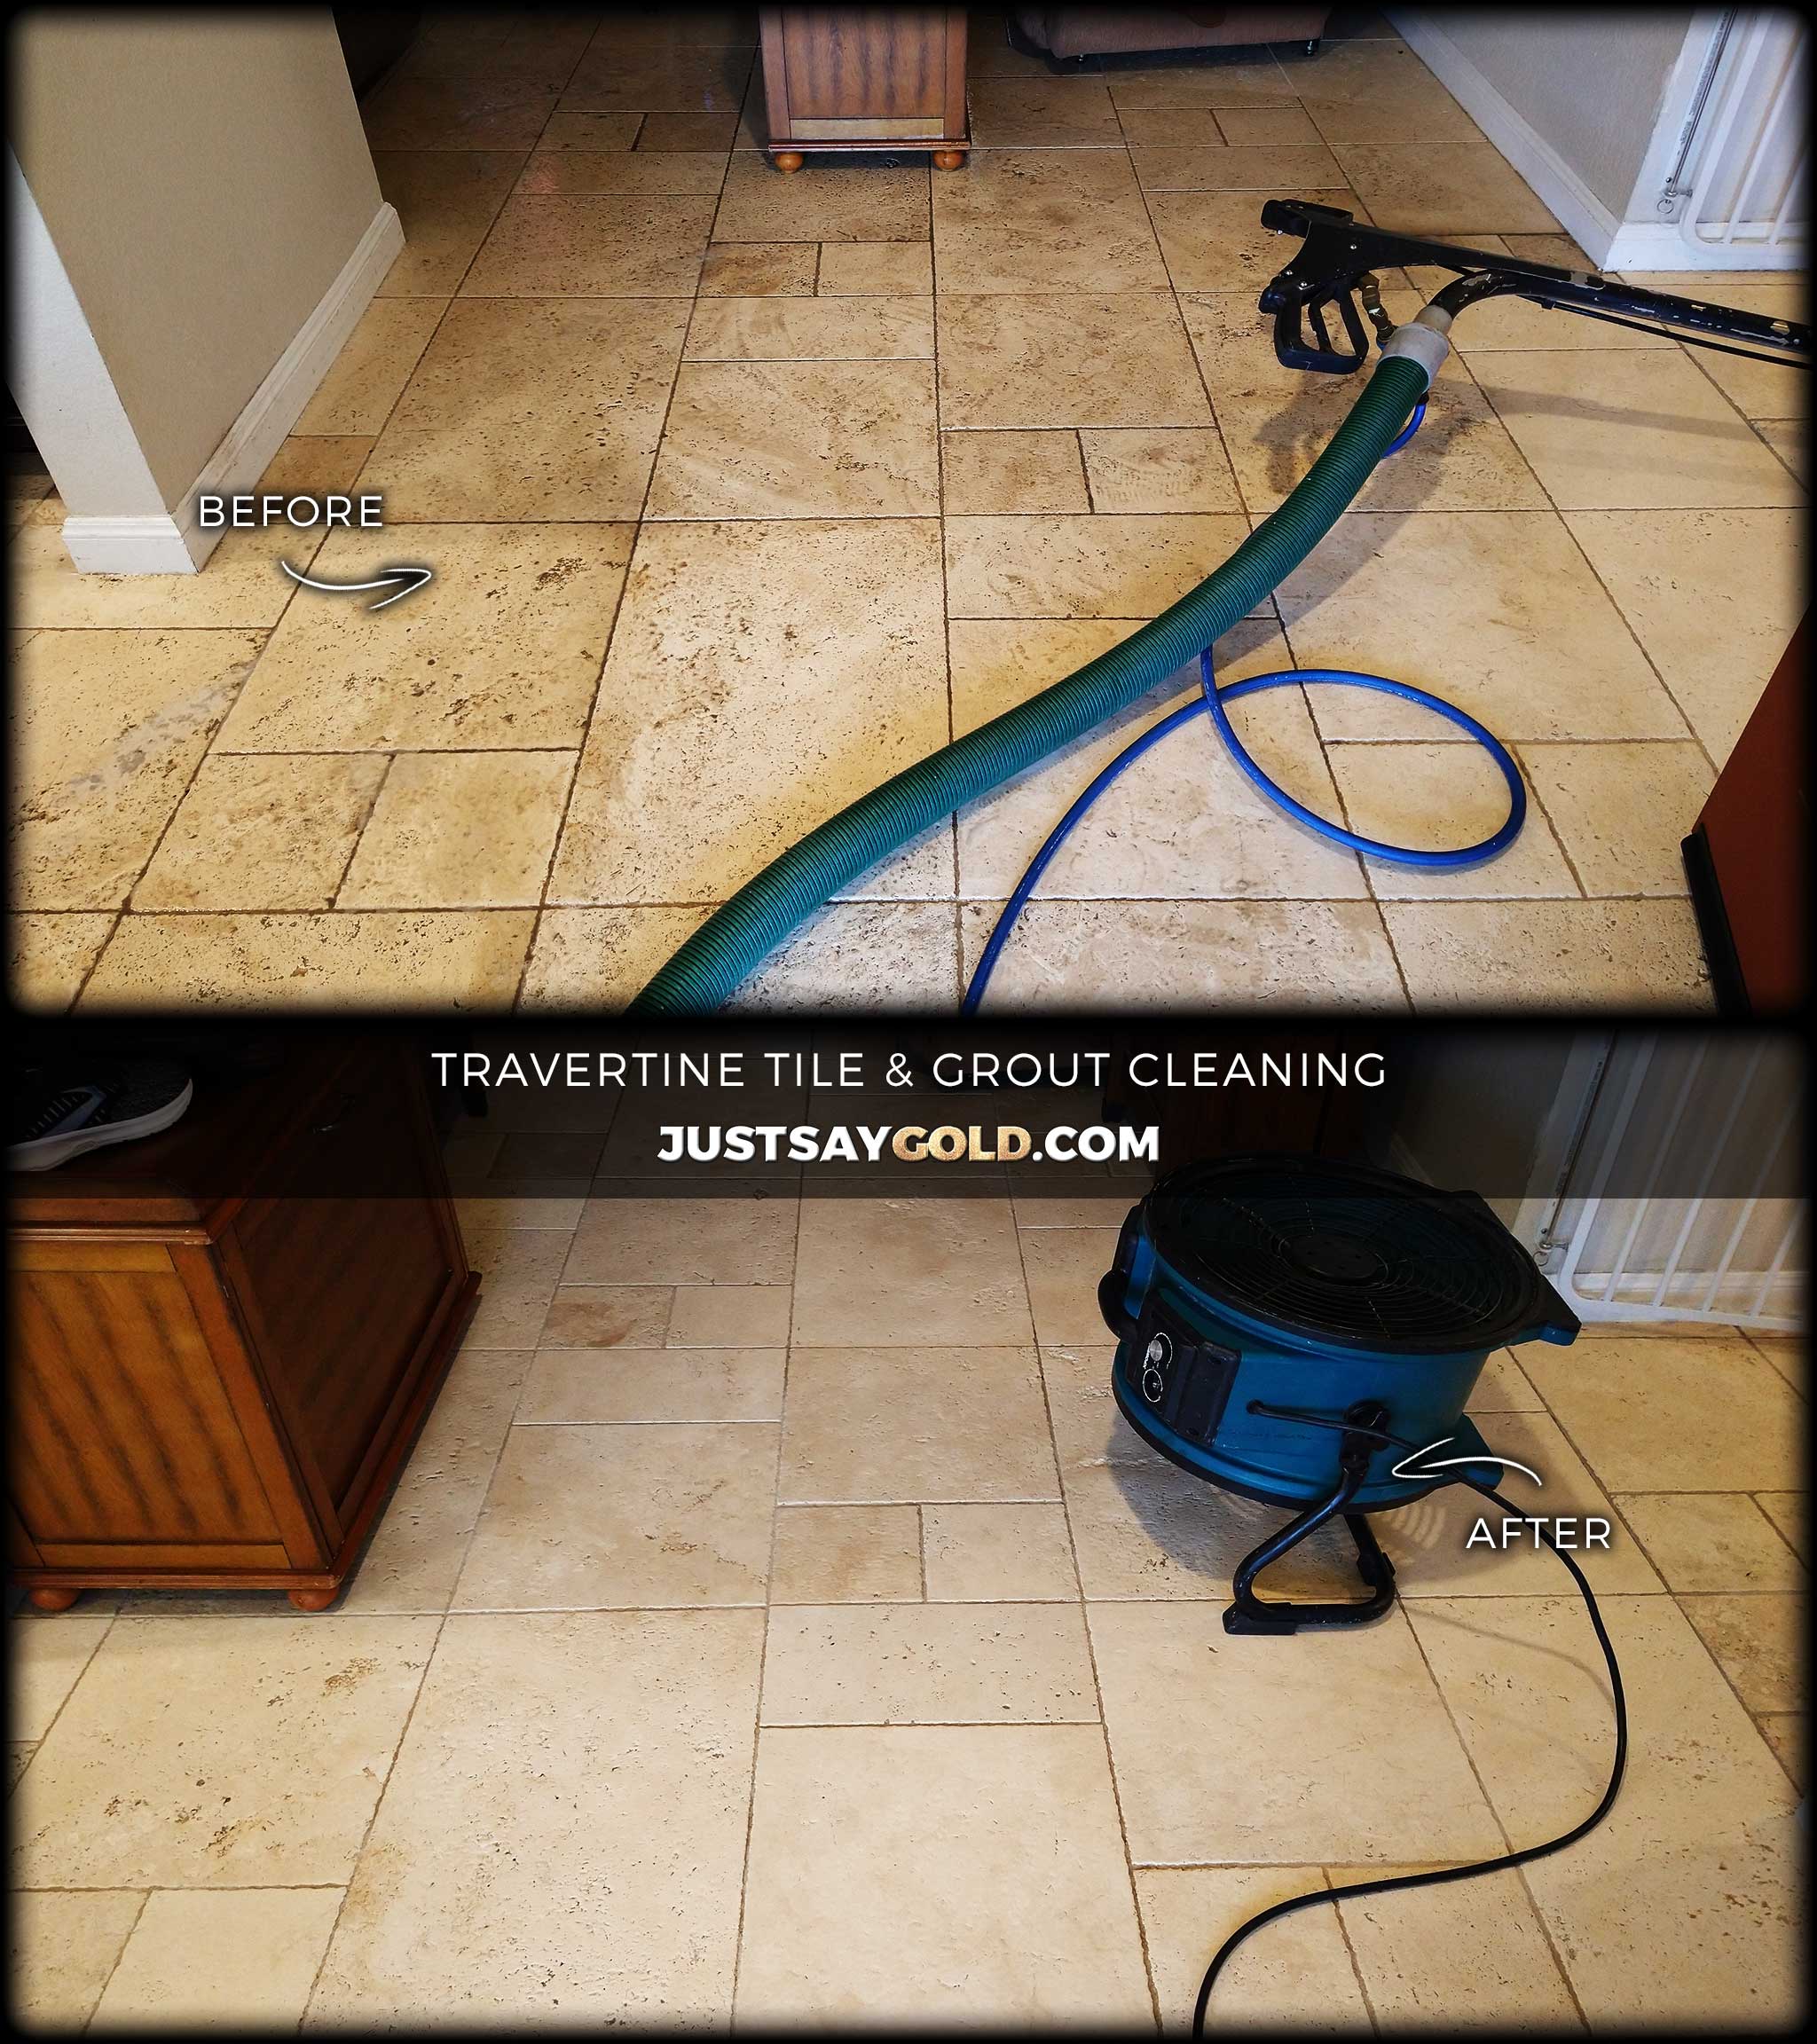 https://goldcoastfloor.com/assets/images/causes/slider/full-natural-stone-grout-cleaning-prices-greenhaven-sacramento-ca-clipper-way.jpg